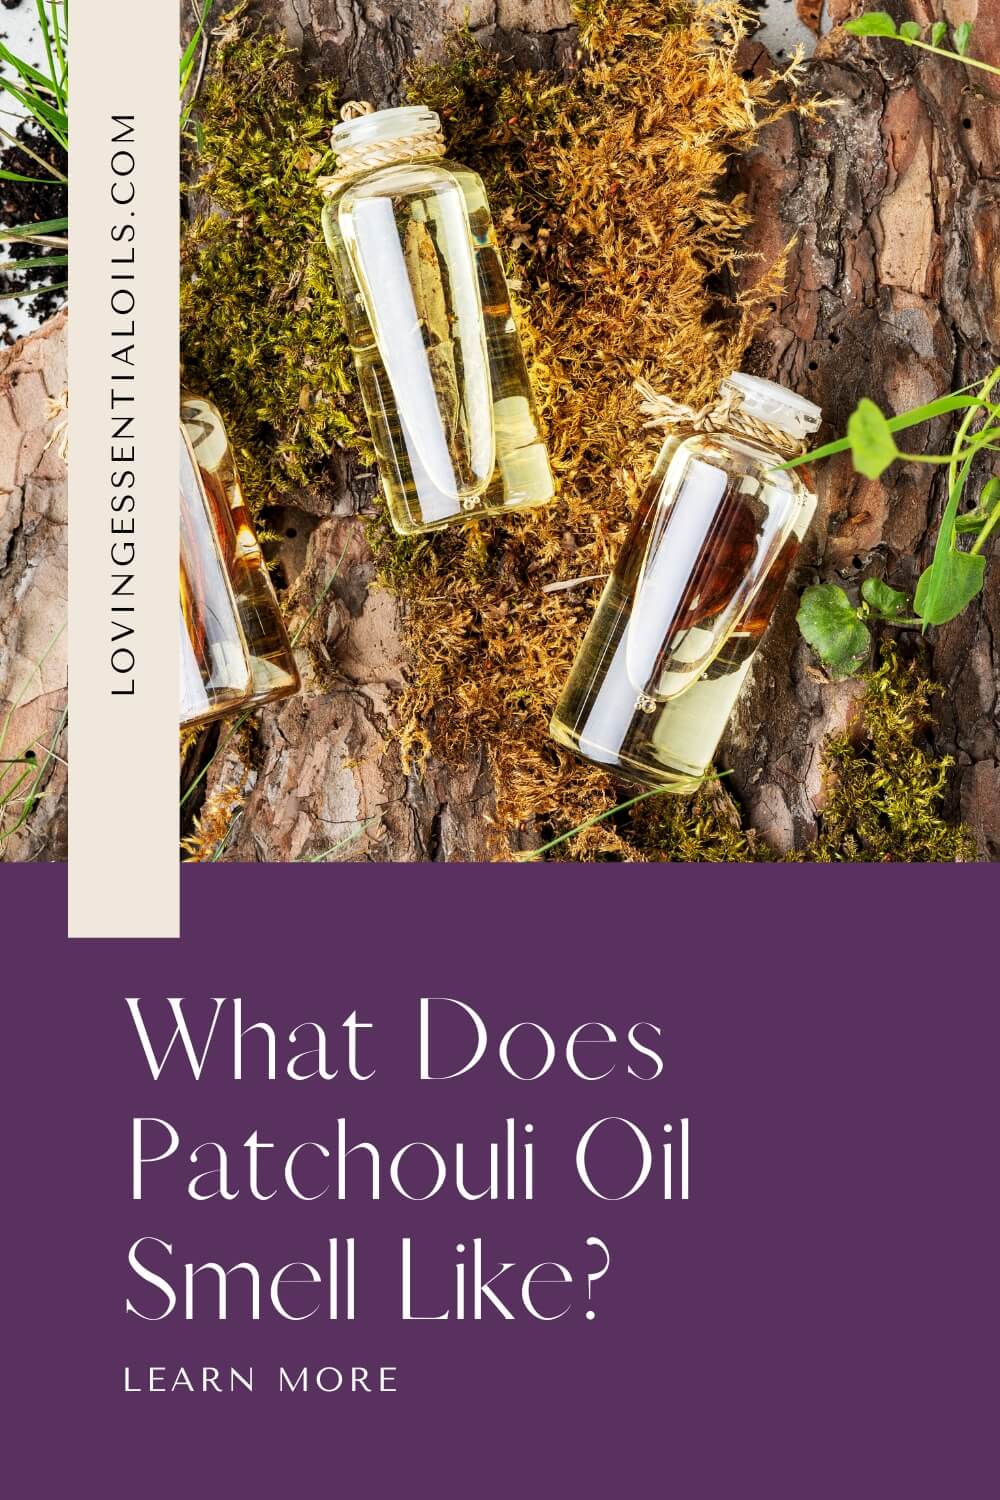 What Does Patchouli Essential Oil Smell Like? by Loving Essential Oils